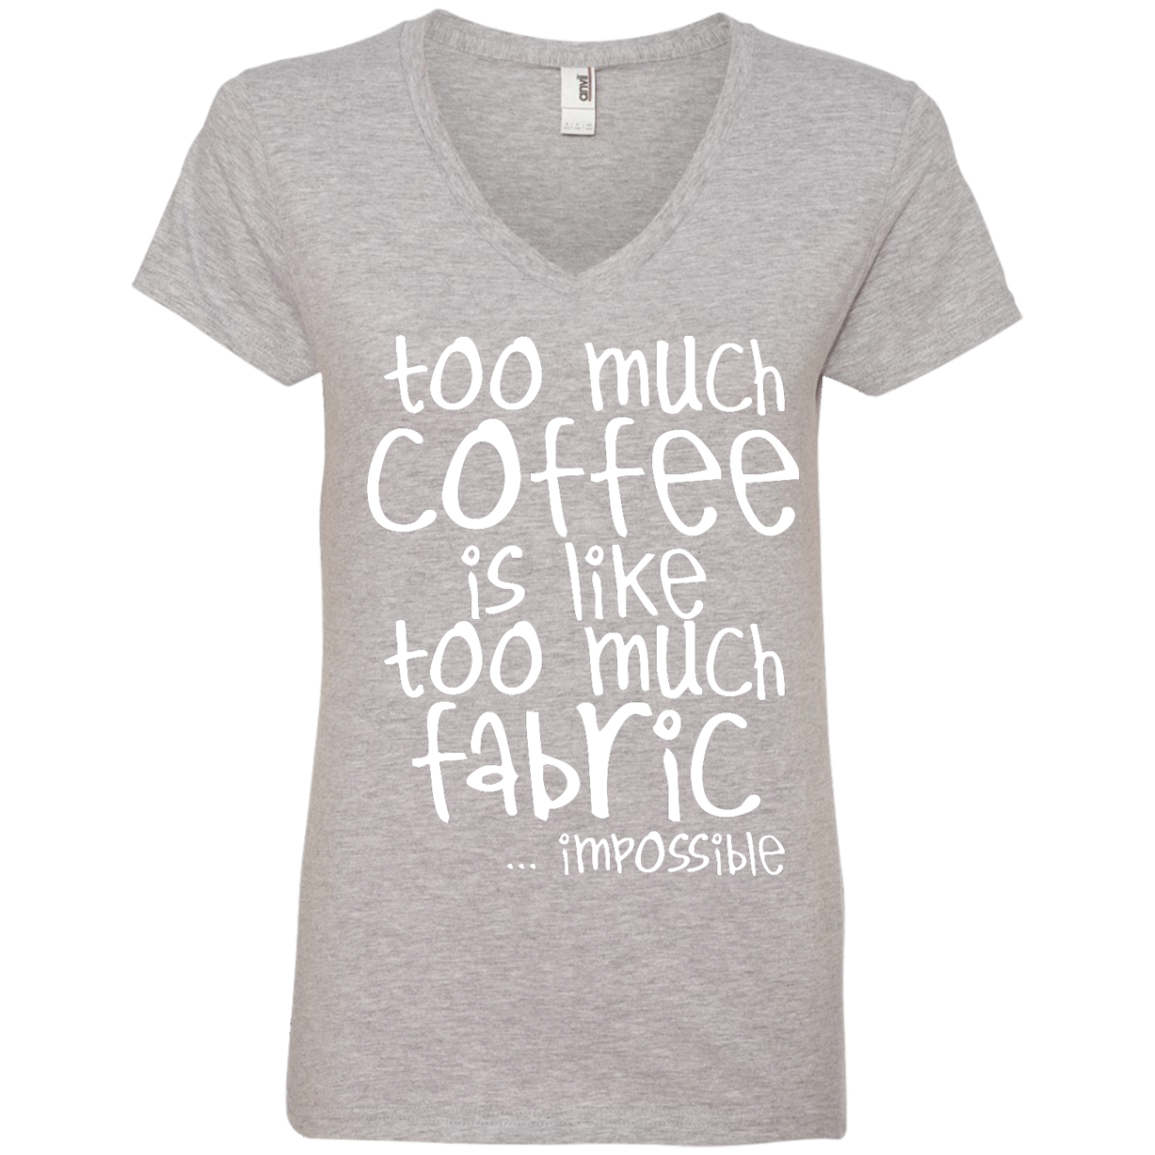 Too Much Coffee is Like Too Much Fabric Ladies V-Neck Tee